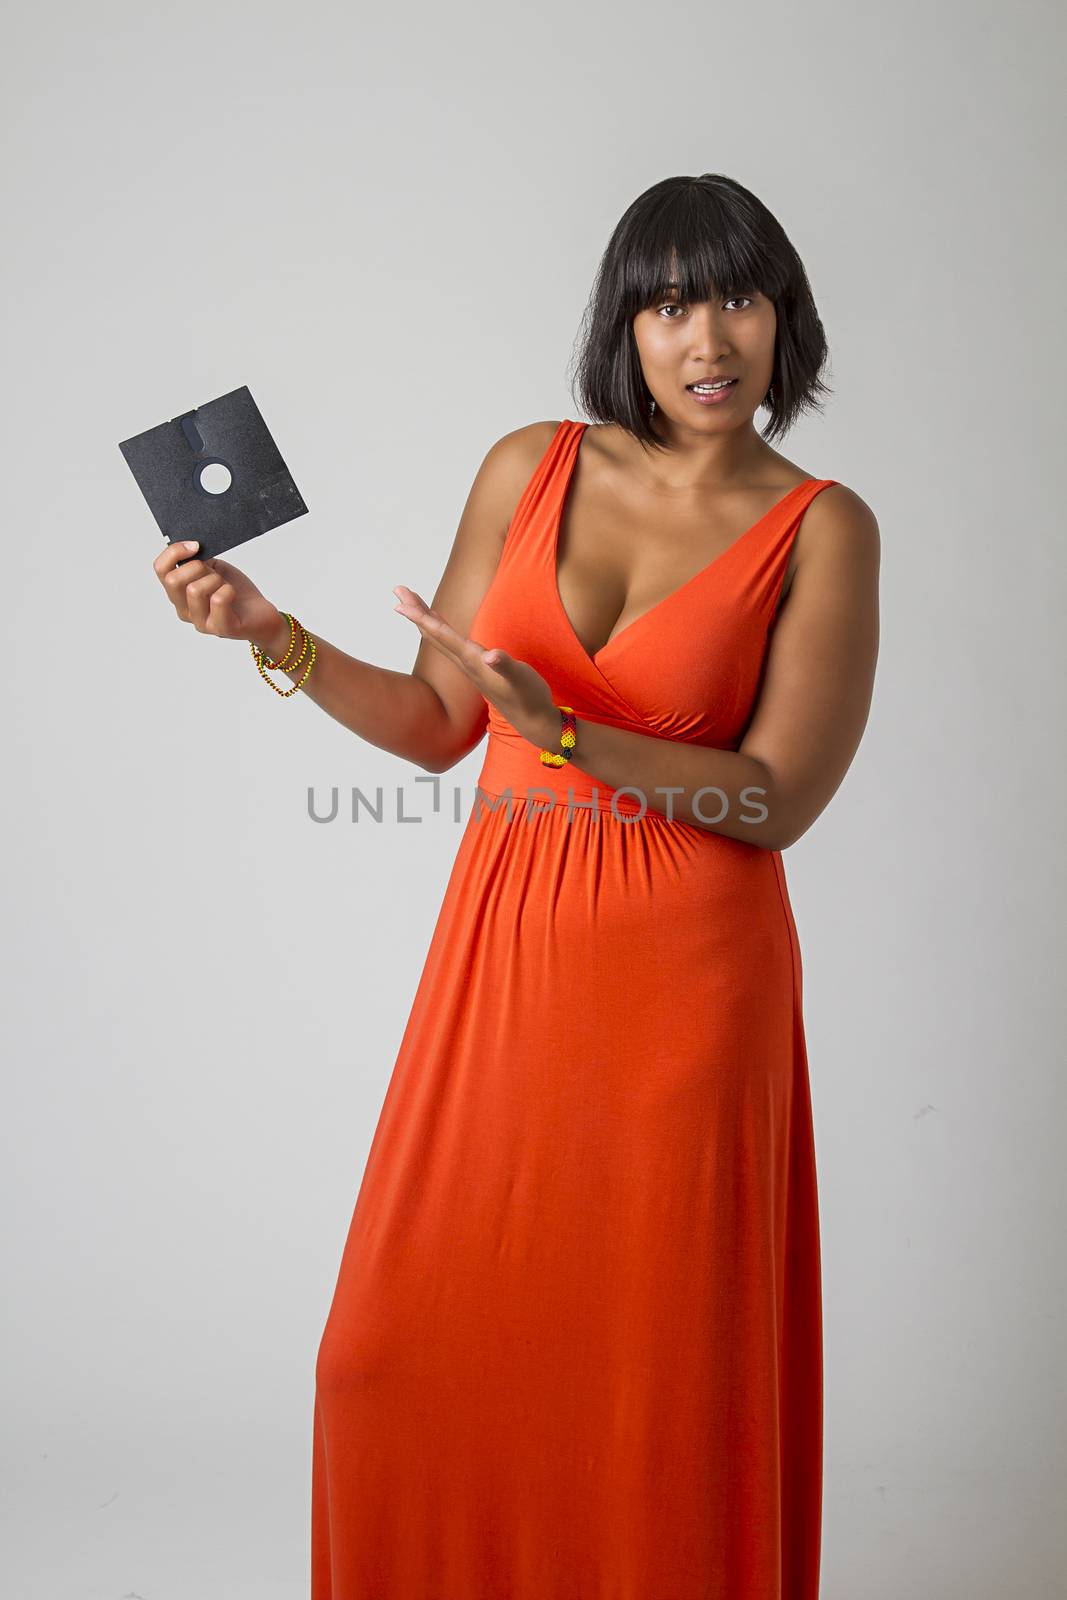 Sexy asian woman wearing a low cut orange dress, holding an old 5 in floppy disk, with questionning expression